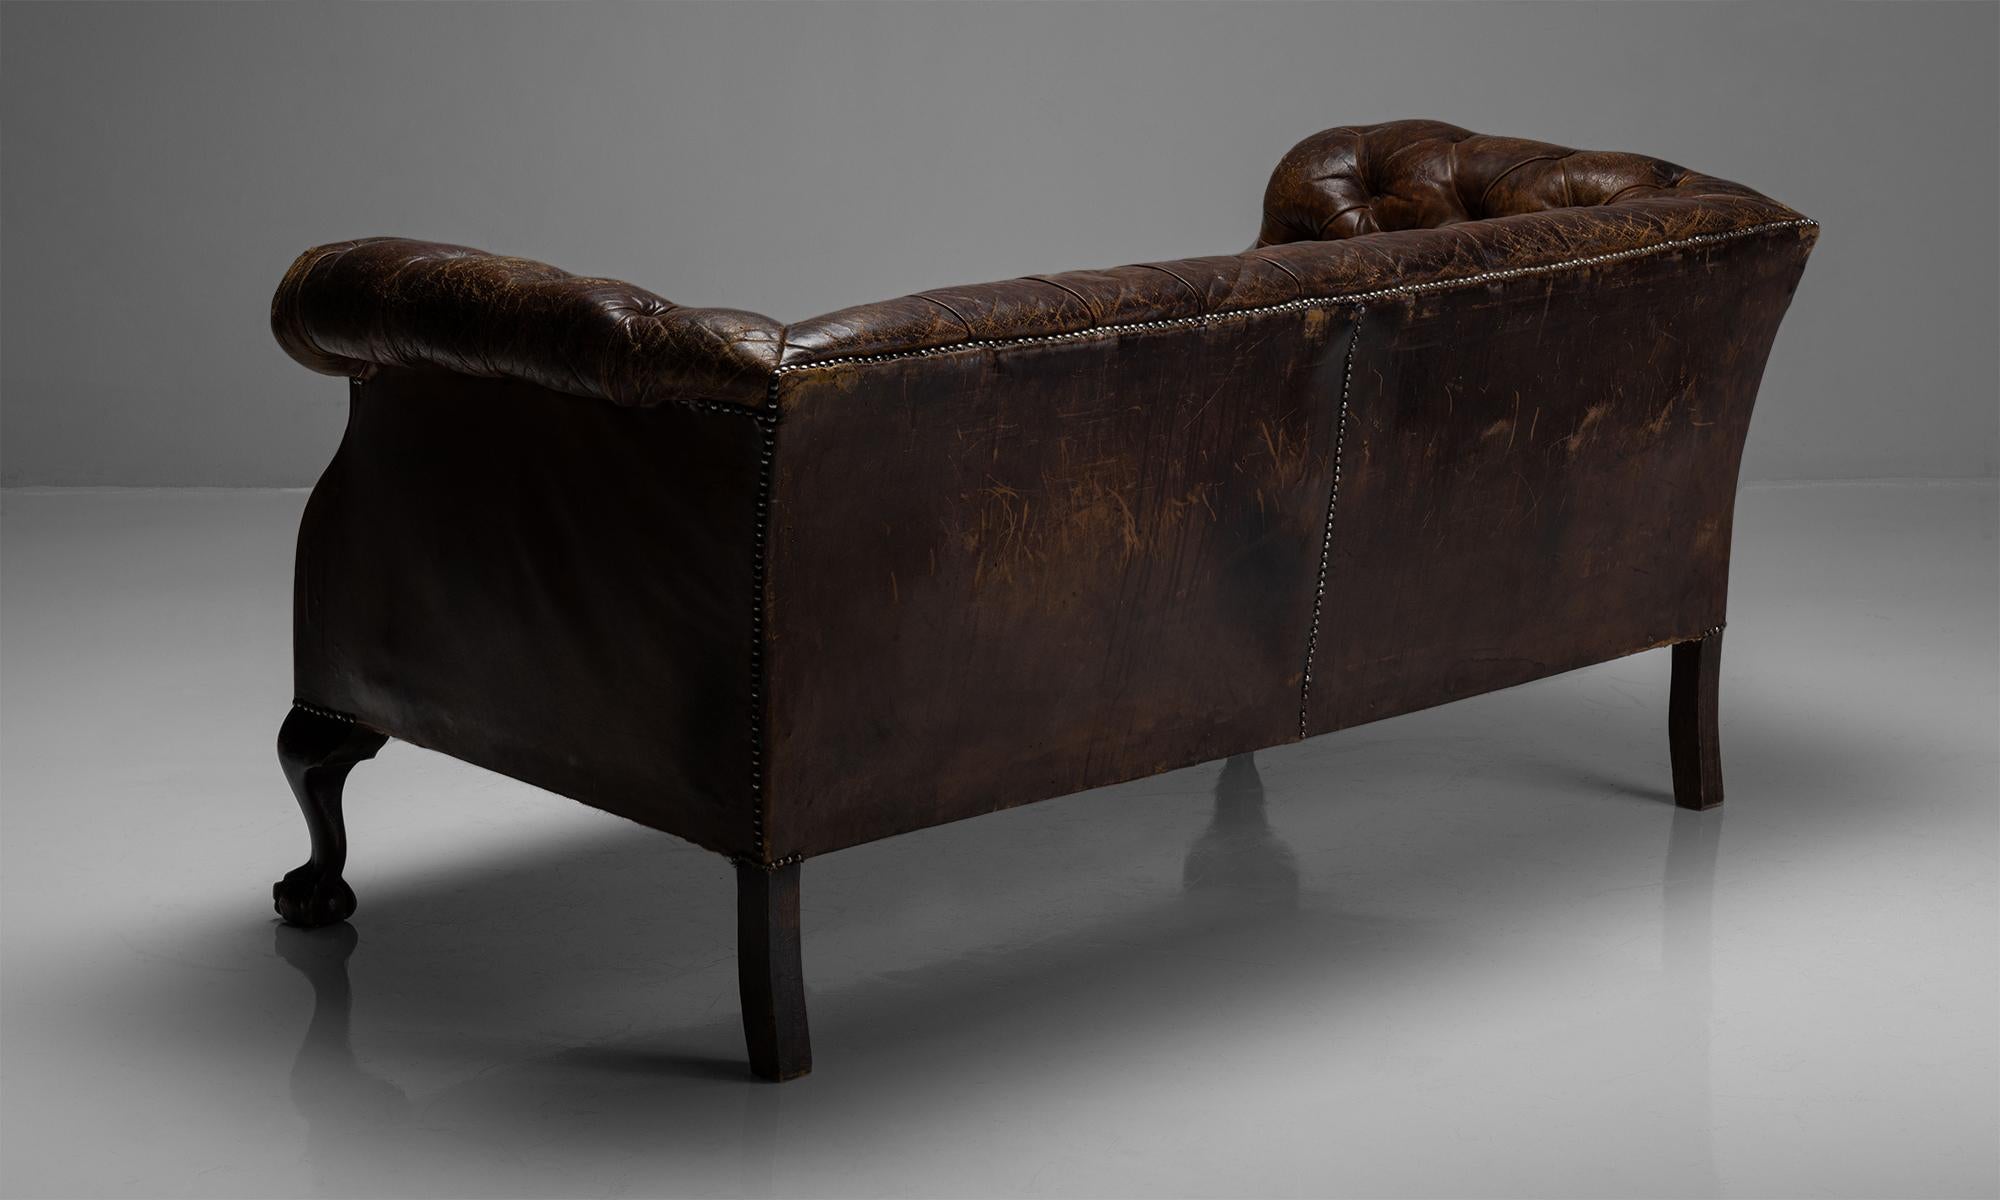 English Leather Chesterfield Two Seater Sofa, Circa 1900